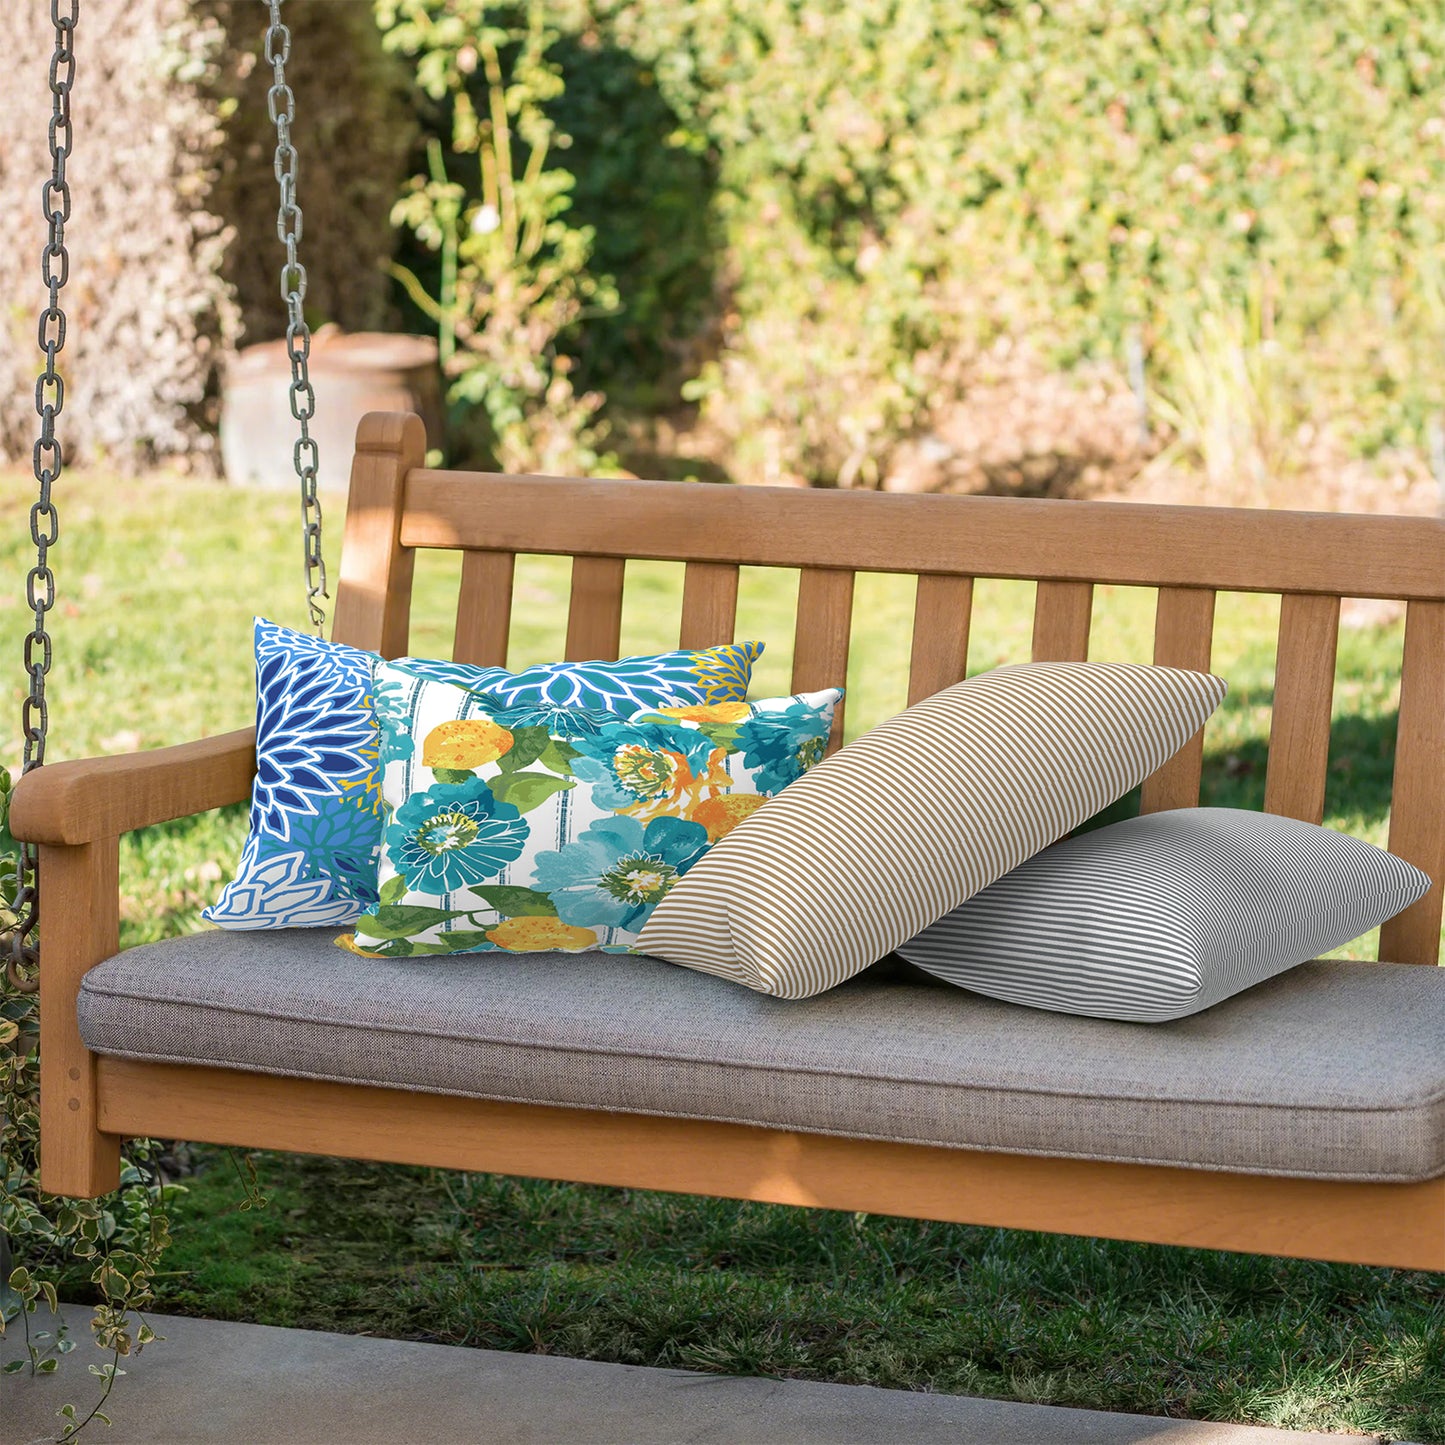 Melody Elephant Outdoor/Indoor Lumbar Pillows, Water Repellent Cushion Pillows, 12x20 Inch, Outdoor Pillows with Inserts for Home Garden, Pack of 2, Dahlia Blue